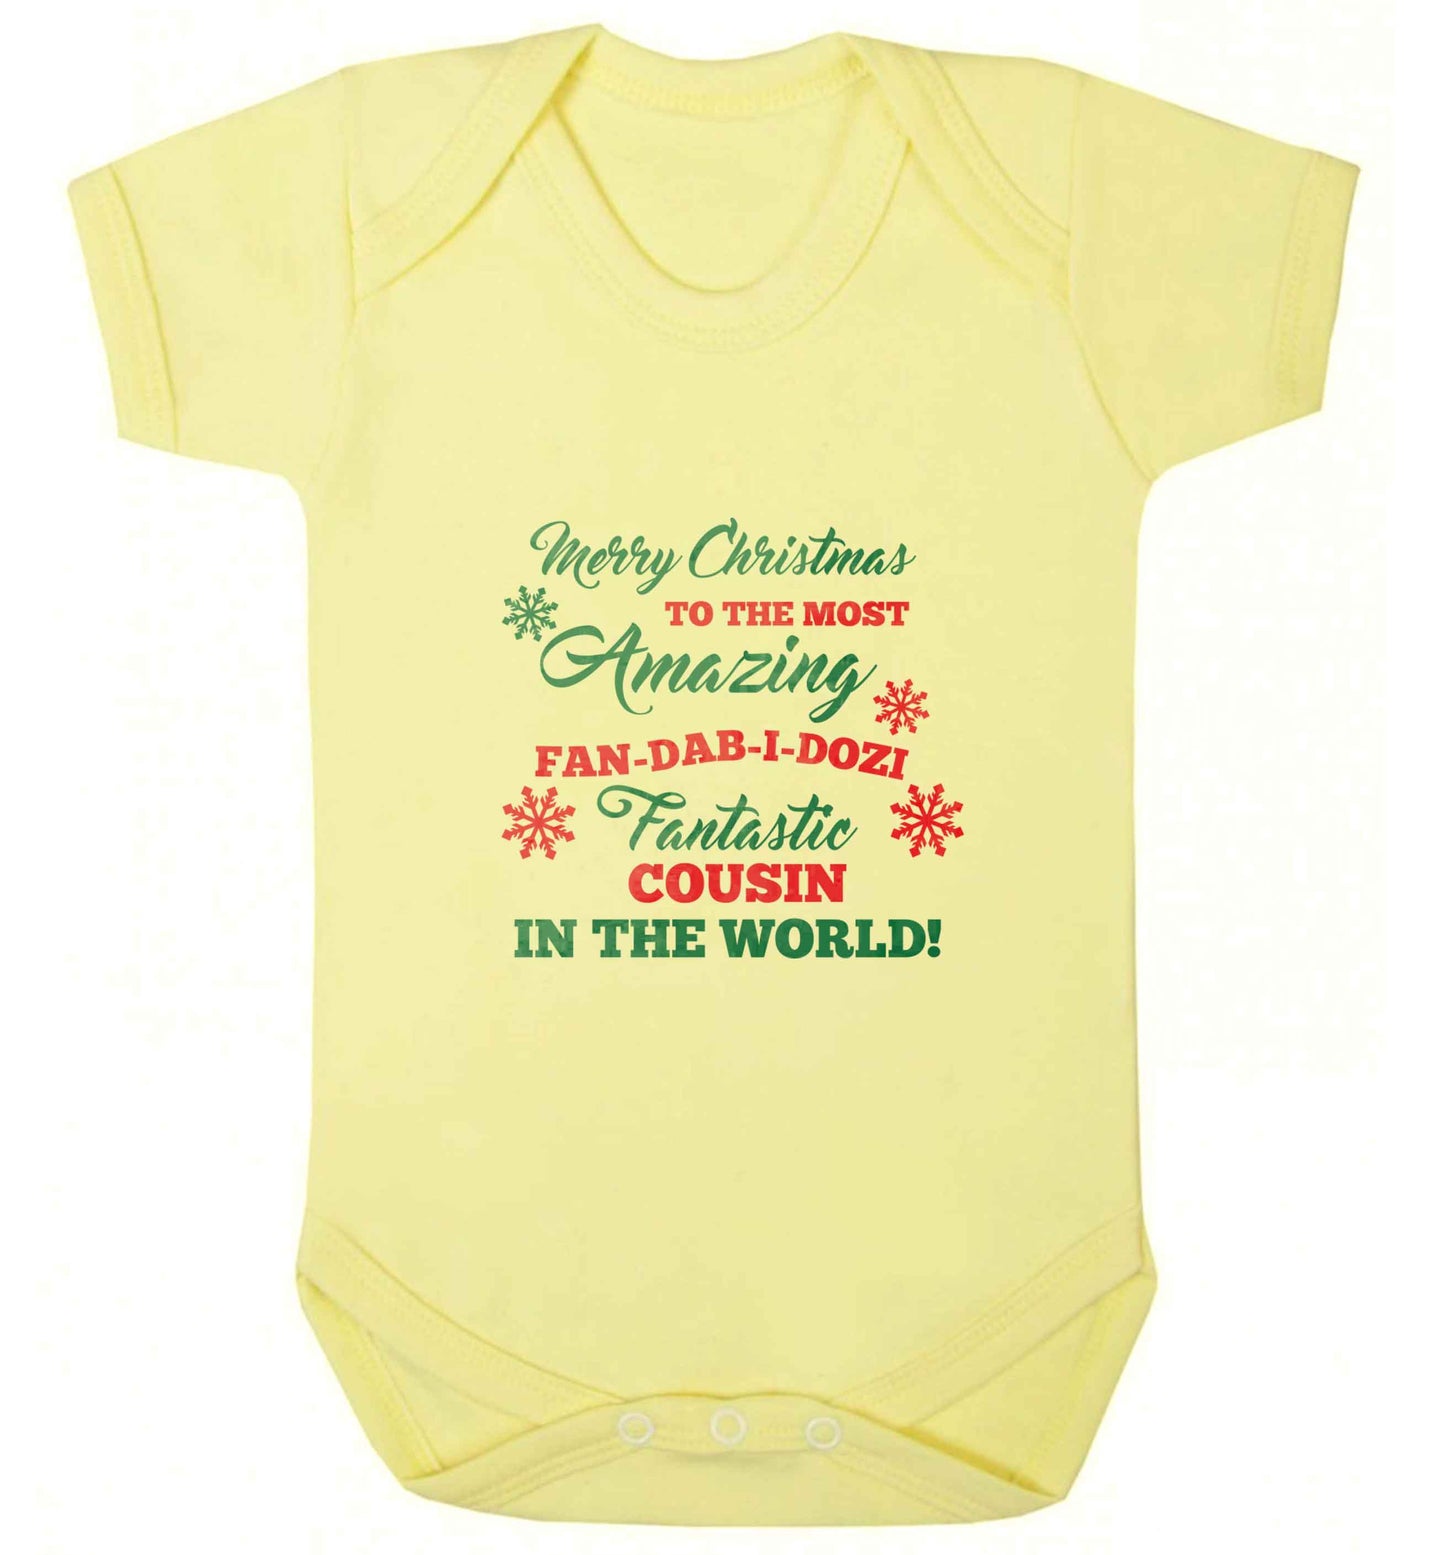 Merry Christmas to the most amazing fan-dab-i-dozi fantasic Cousin in the world baby vest pale yellow 18-24 months